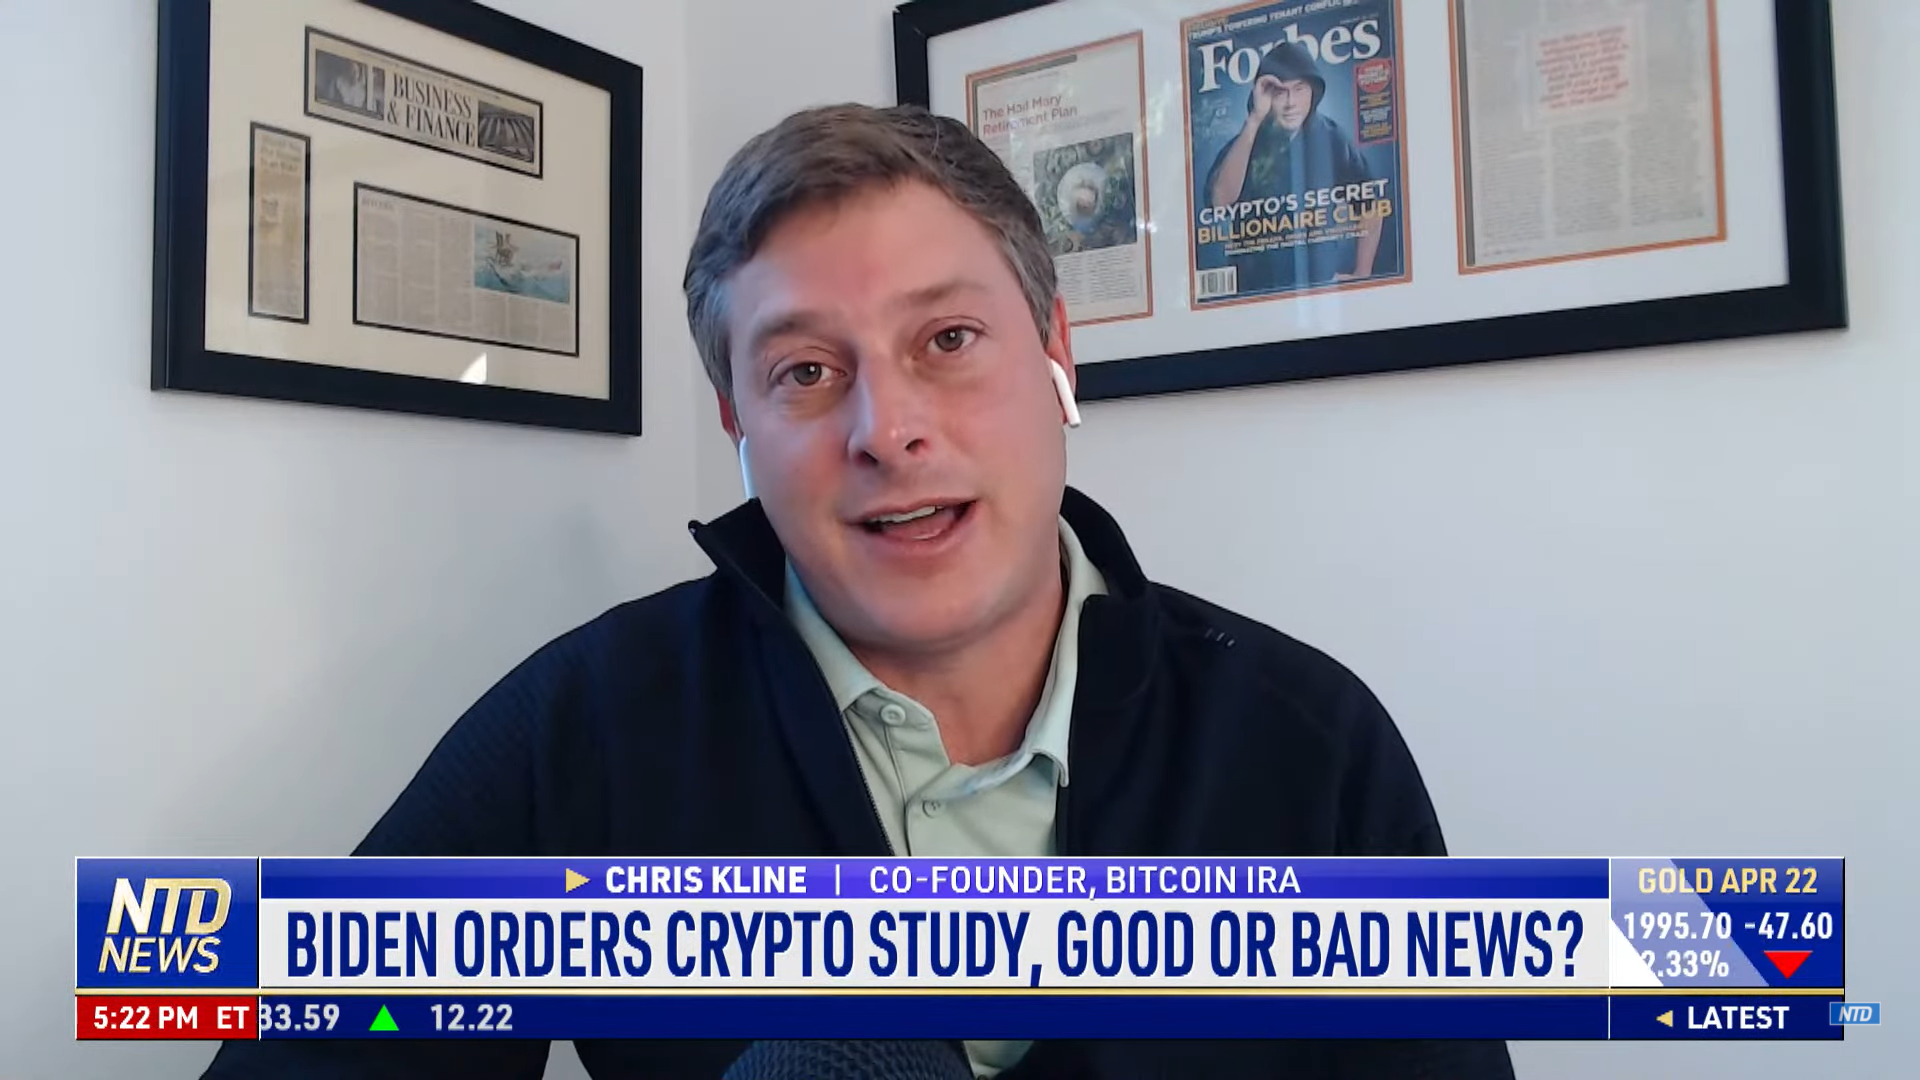 Chris Kline sits in his office with a news headline about Biden crypto study below him